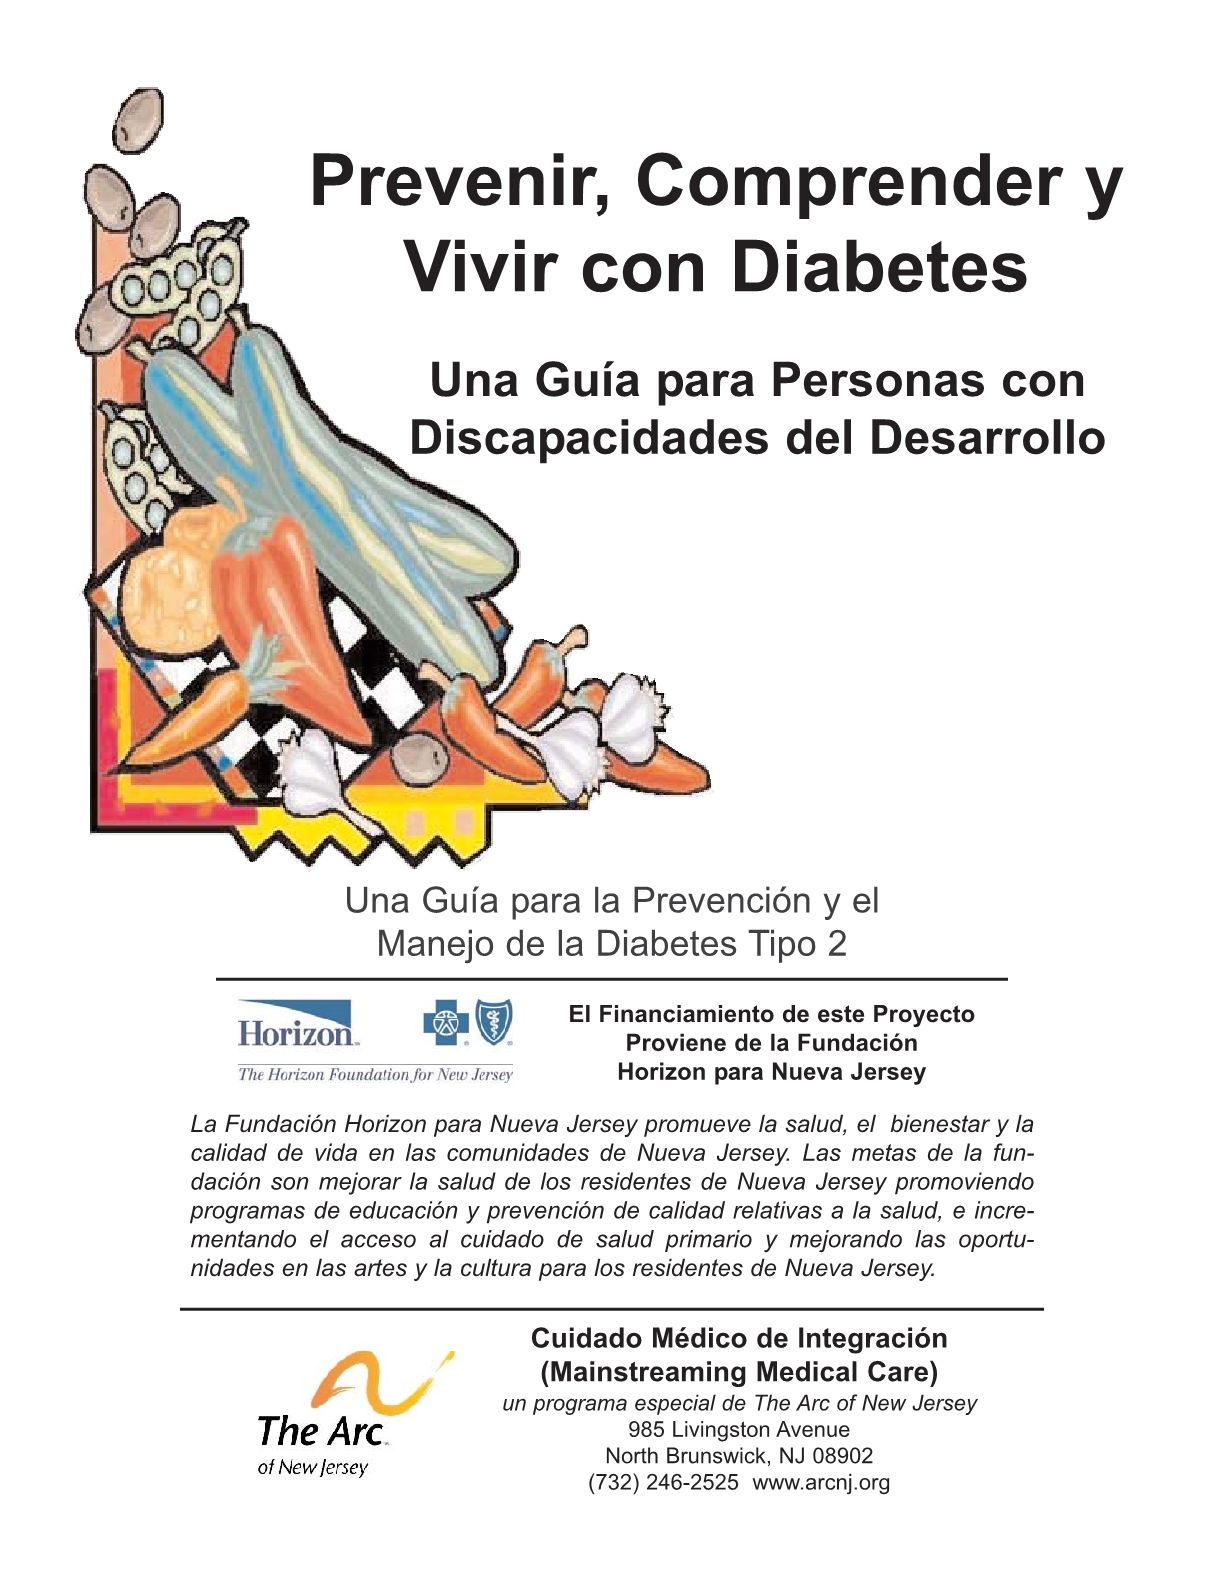 Prevent, Understand, and Live with Diabetes_A Guide for Individuals with Developmental Disabilities - Spanish